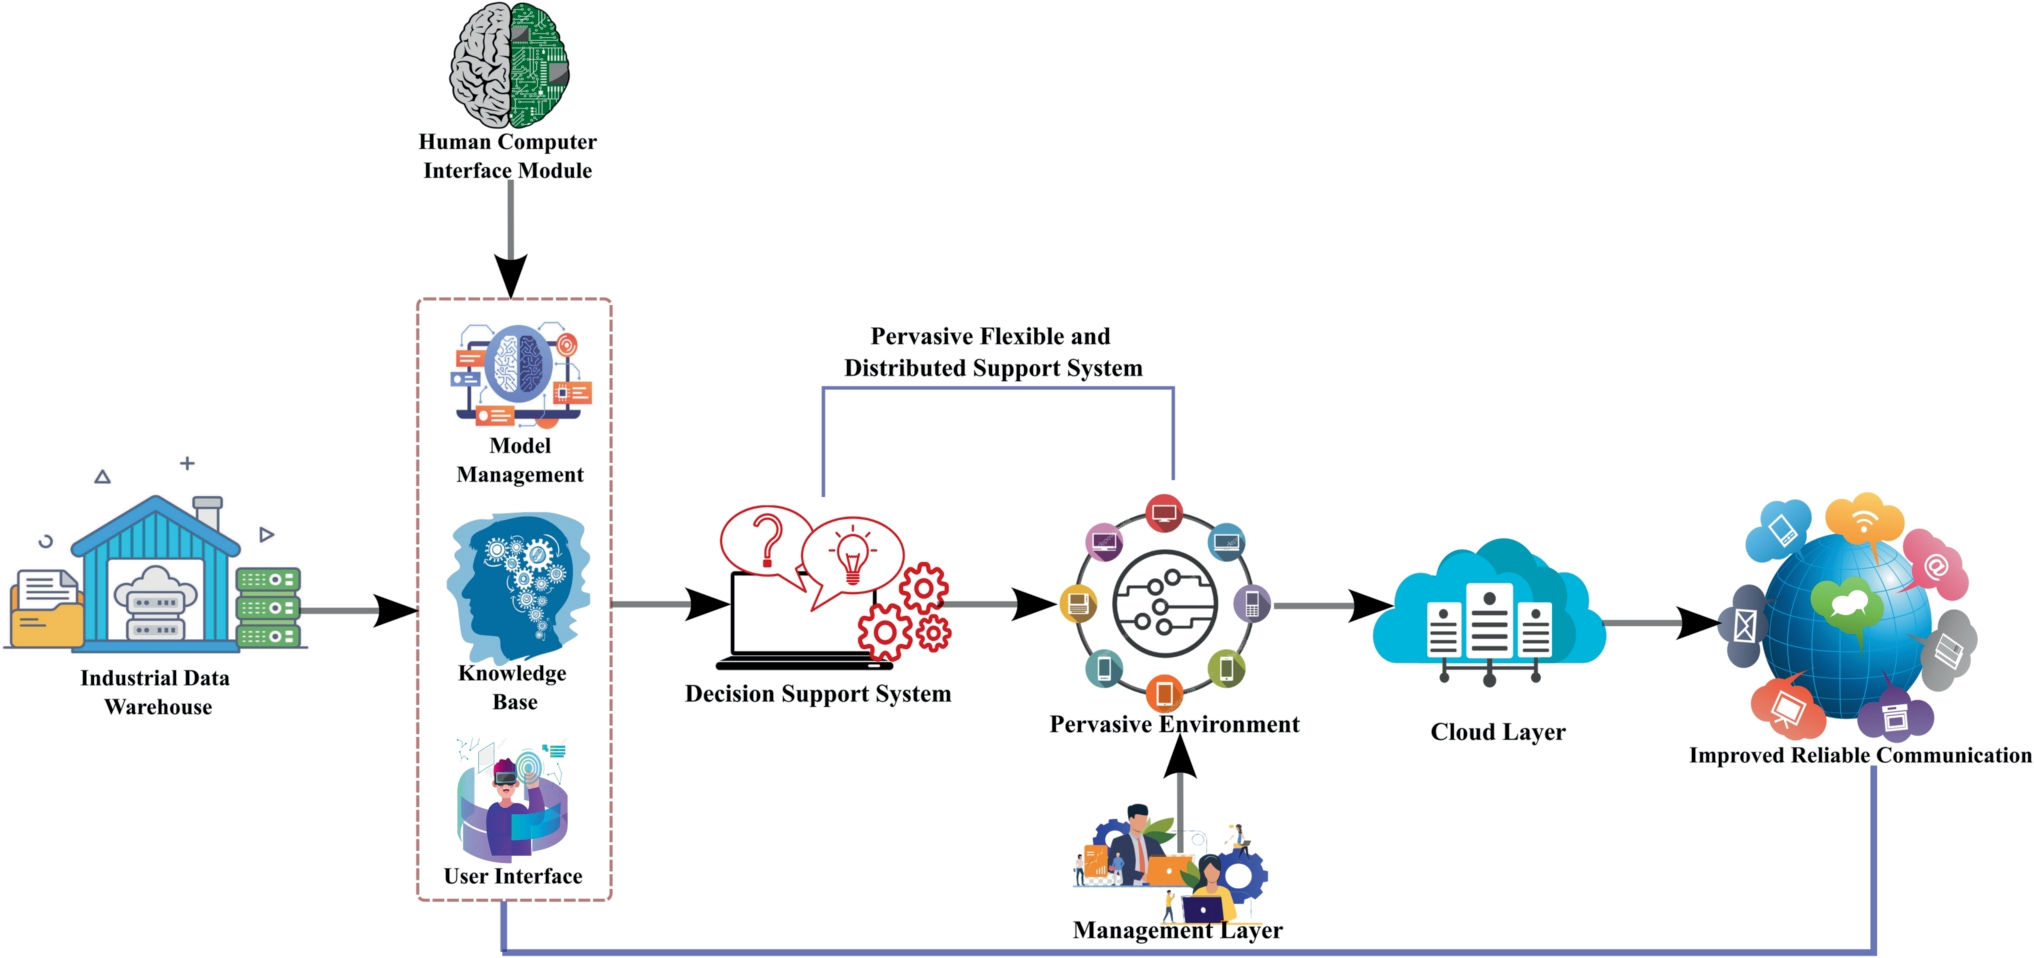 A Cognitive Medical Decision Support System for IoT-Based Human-Computer Interface in Pervasive Computing Environment